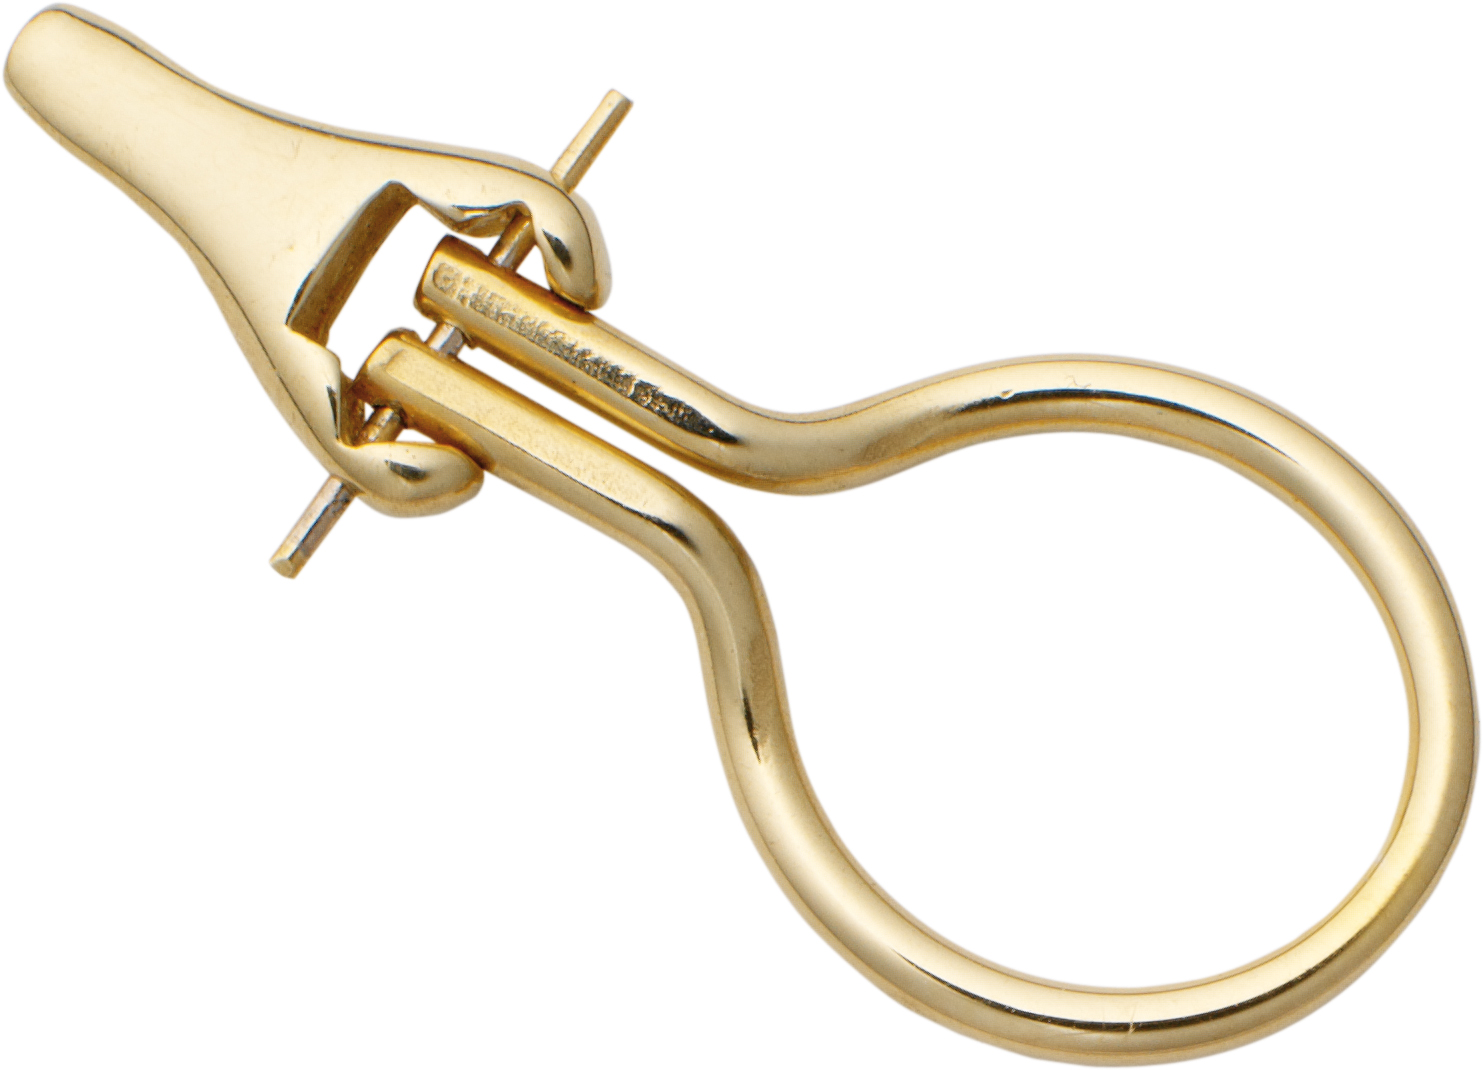 Ear clip mechanism gold 750/-Gg with die cast lug height 8.00mm clip length 17.00mm